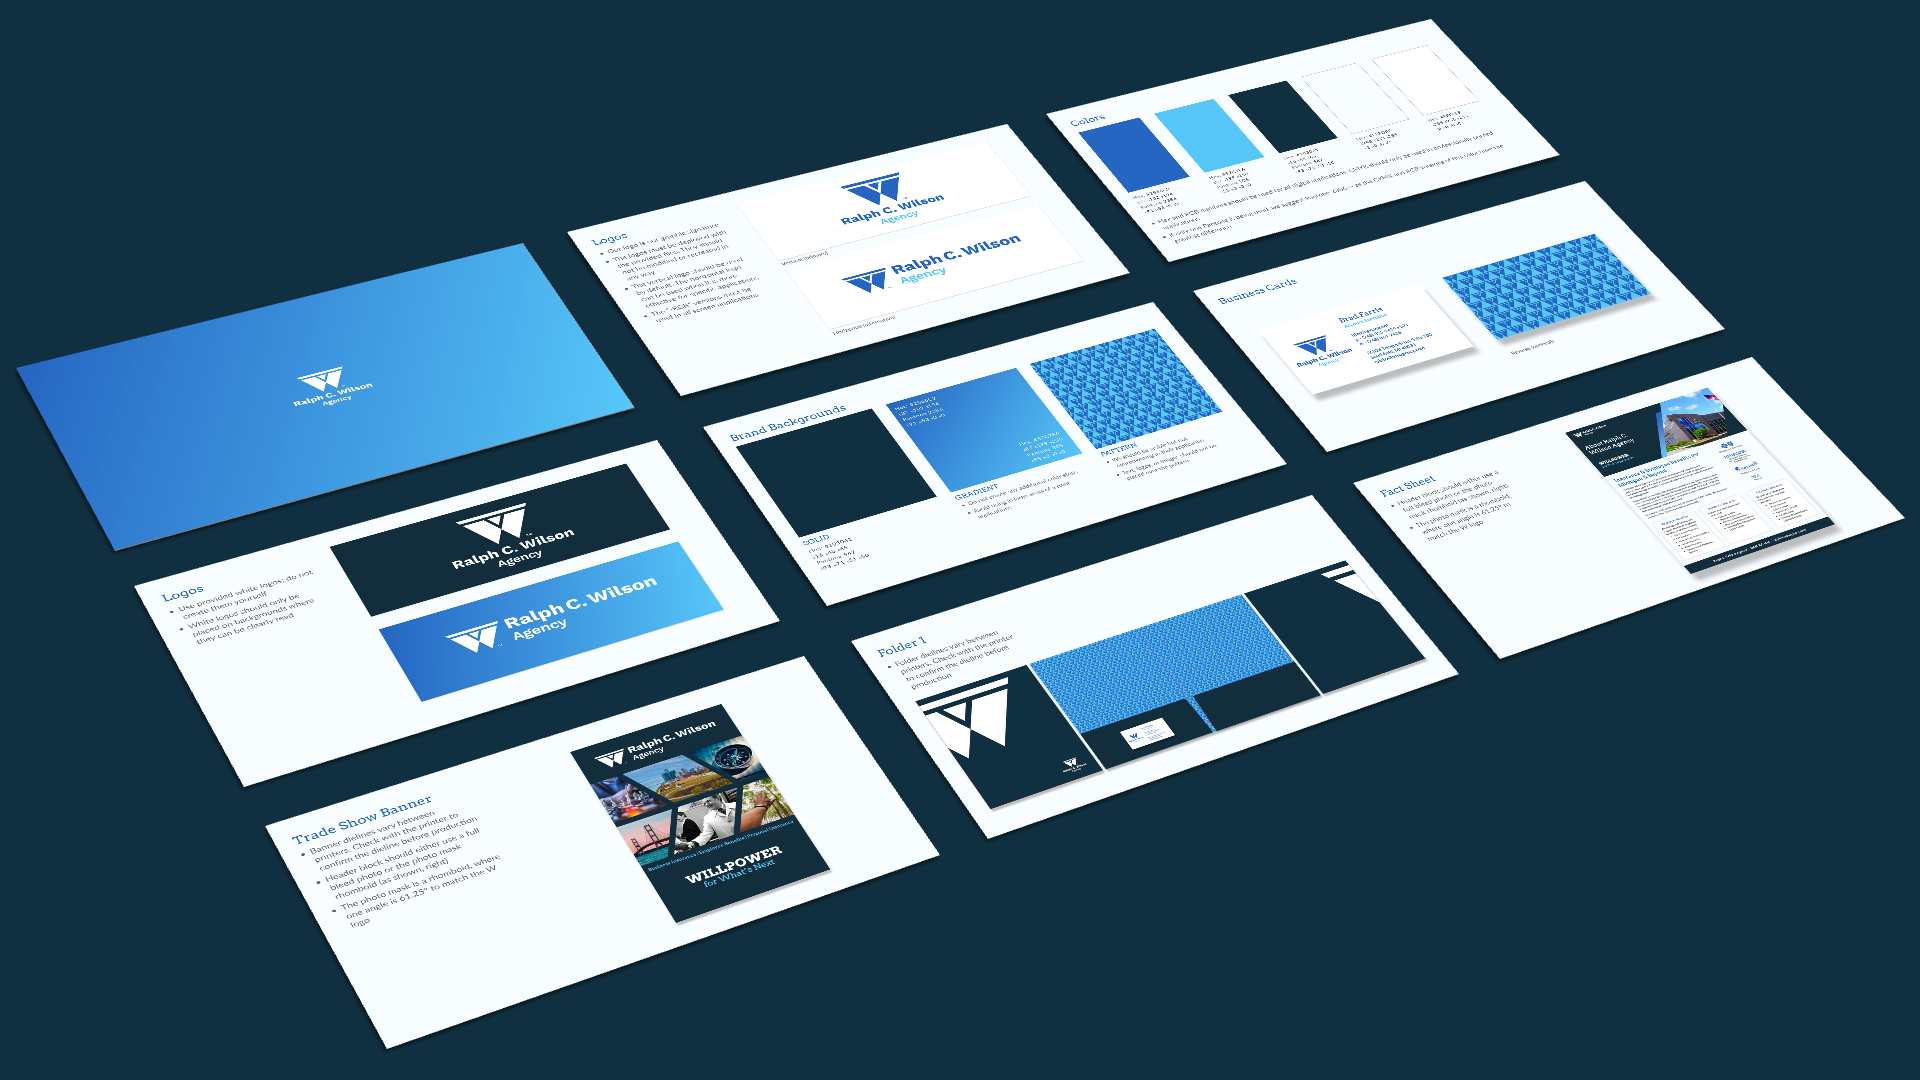 Brand guidelines from Ralph Wilson Agency